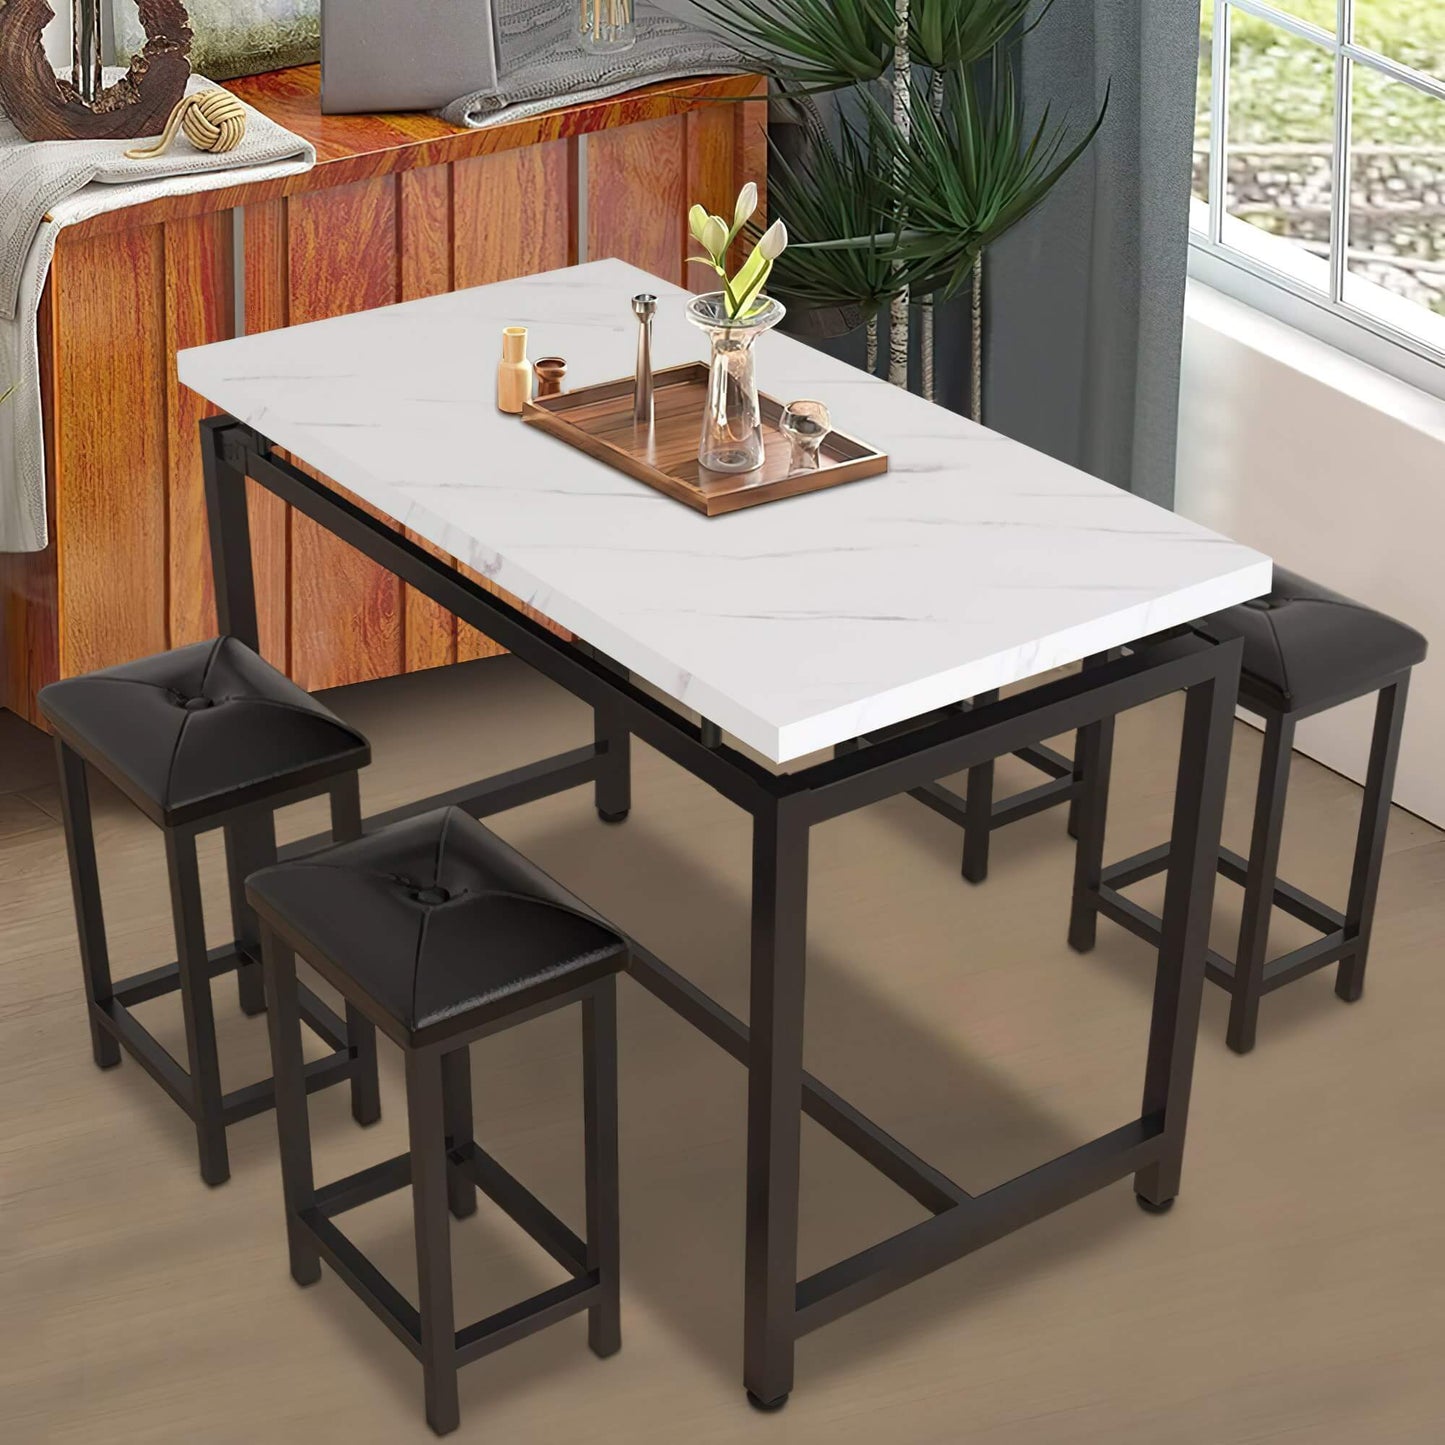 Compelling Marble Dining Set for 4 | Exceptional 5-Piece Wood & Metal Bar Table Set with 4 Upholstered Chairs